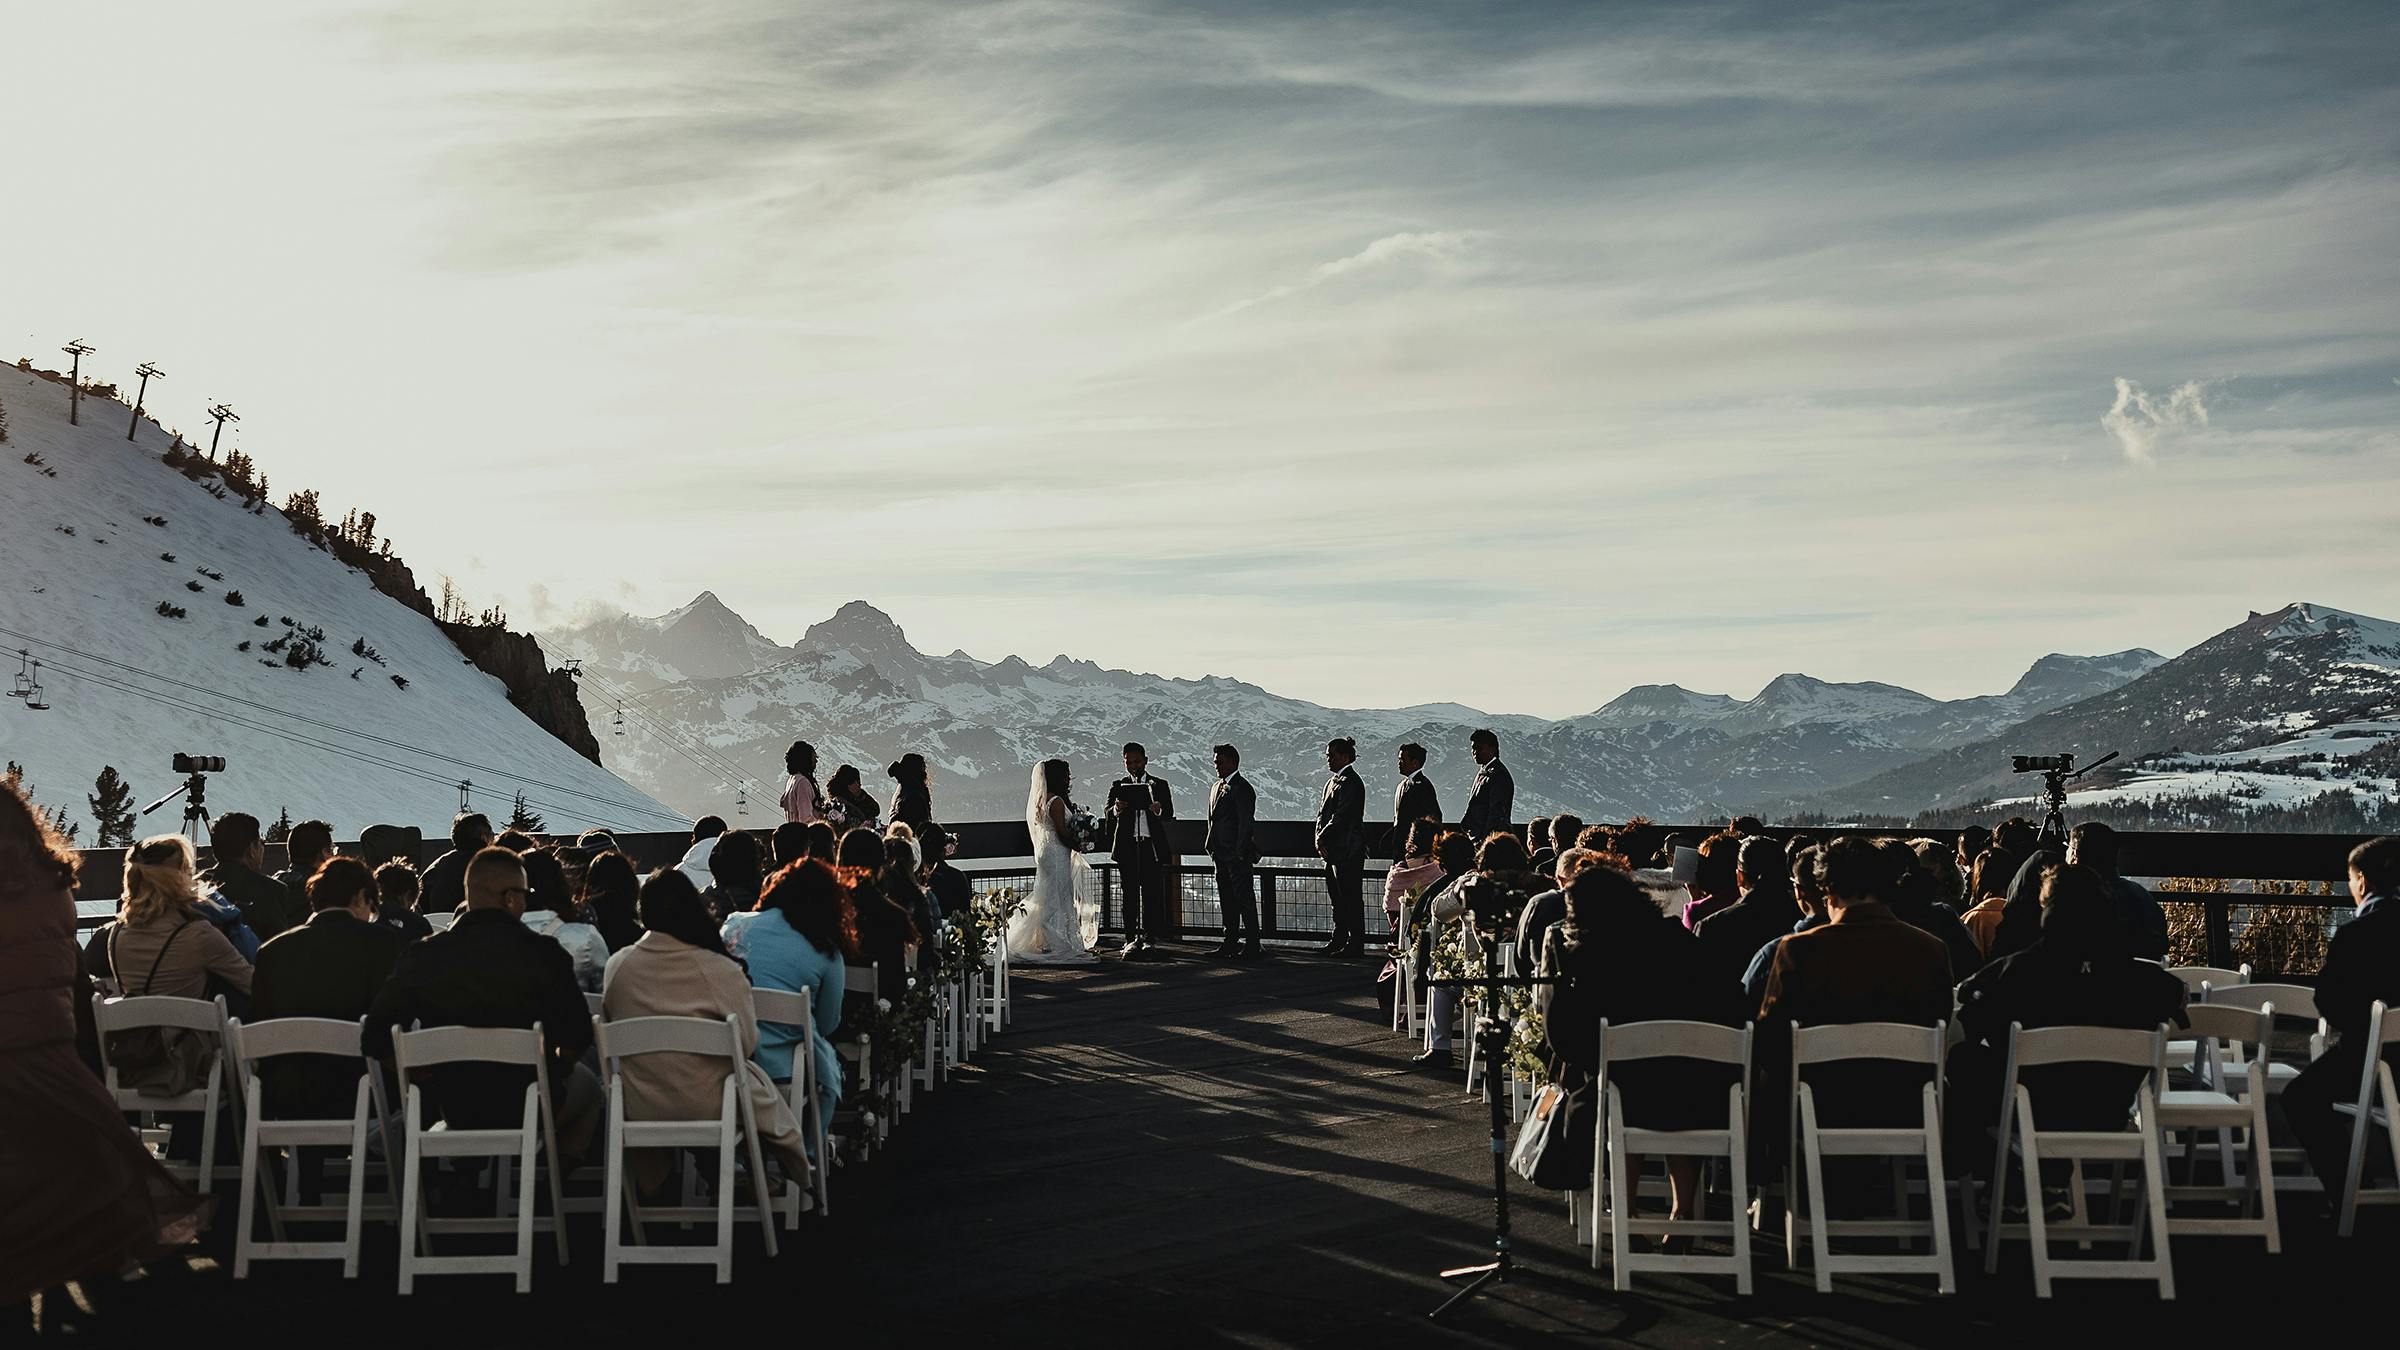 Wedding ceremony on Mammoth Mountain with rows of chairs in the foreground and view of the Minarets in the background